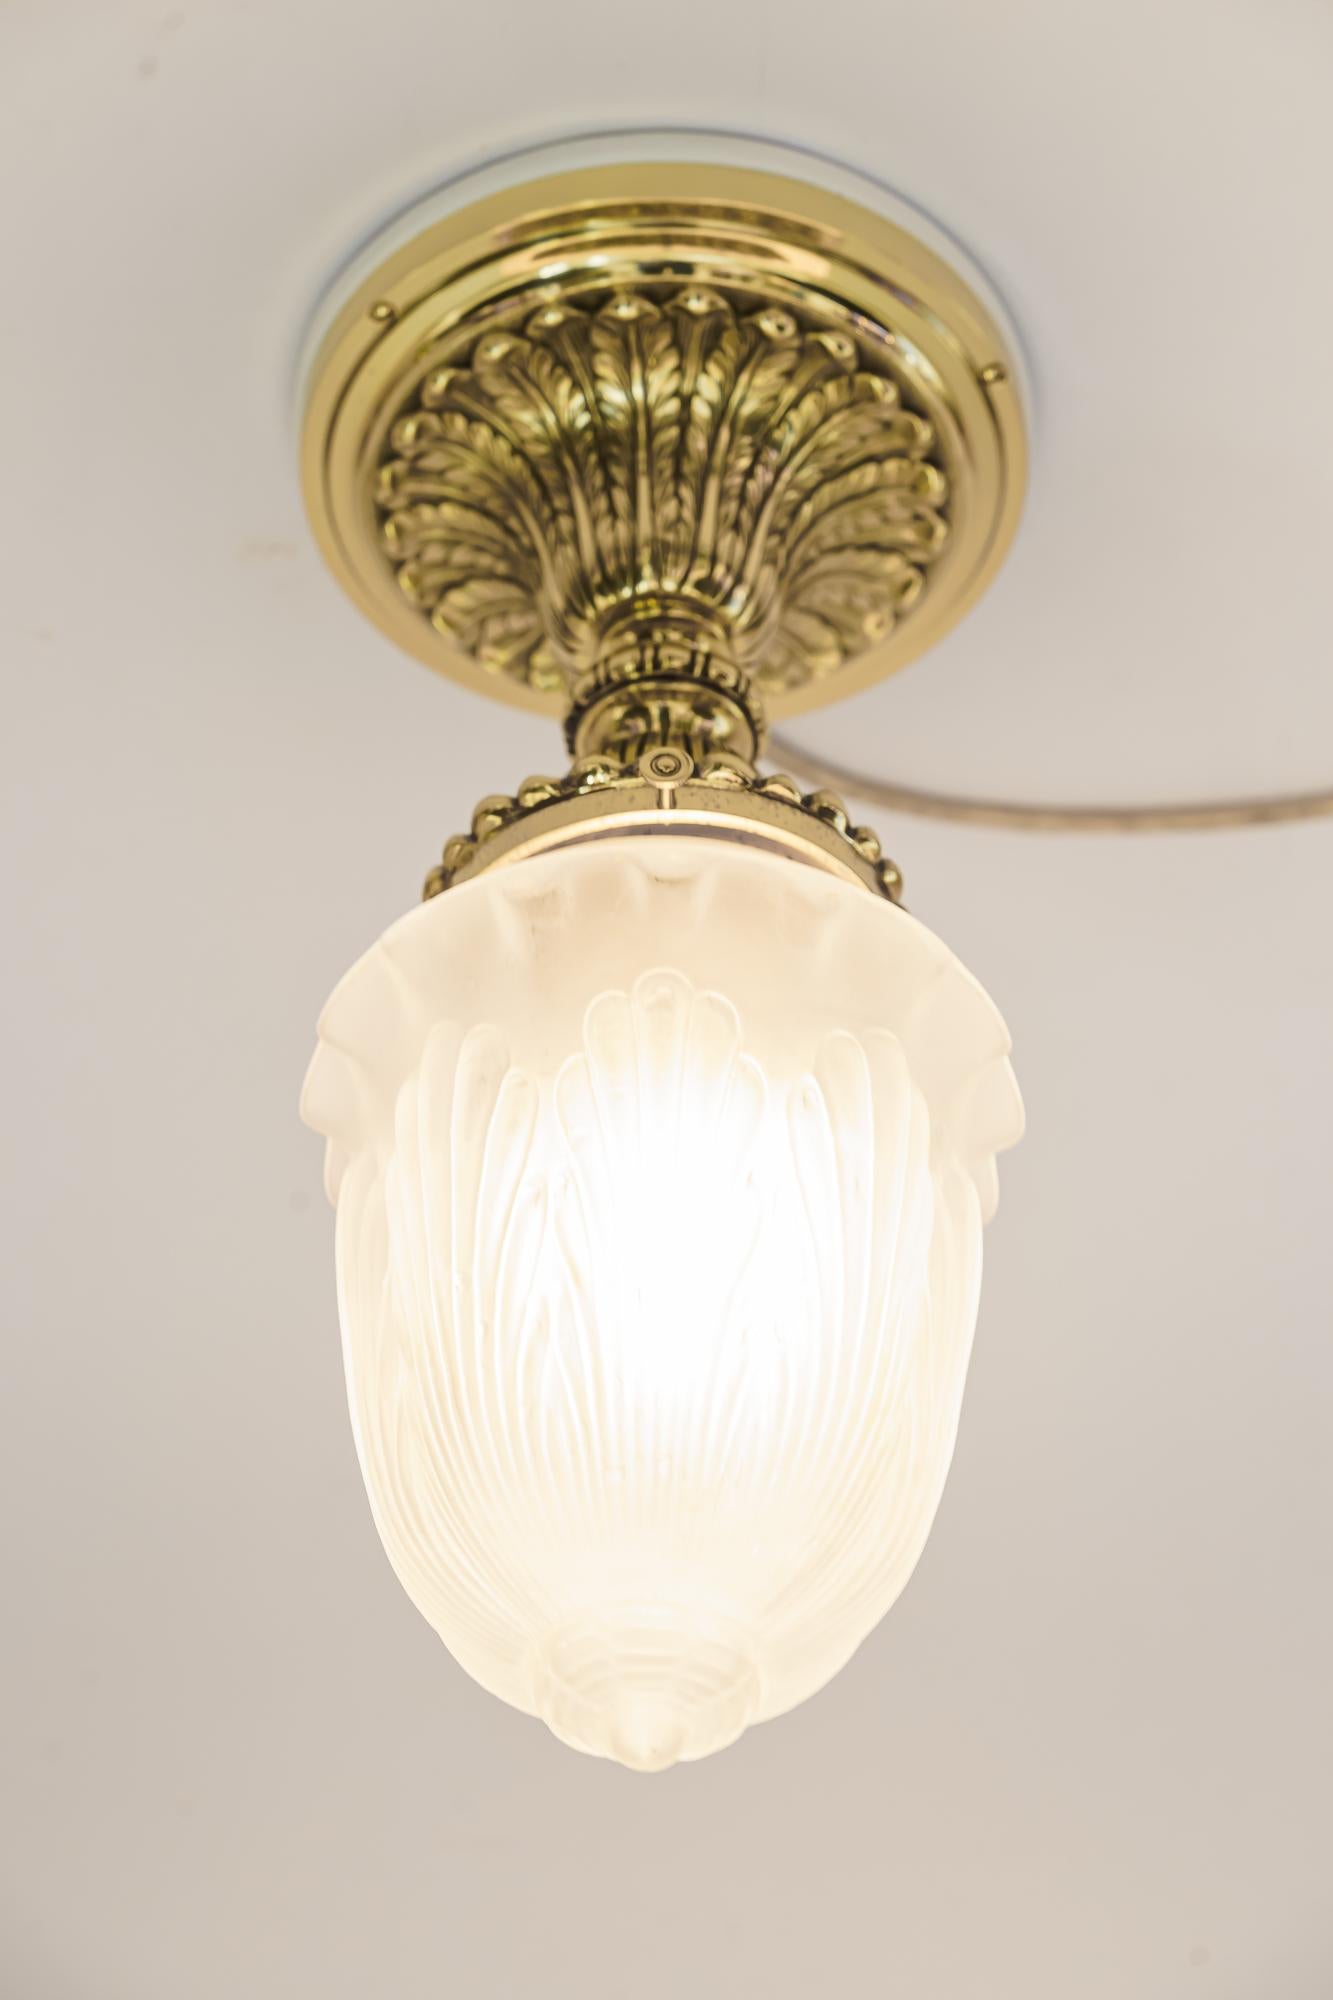 2 Historistic Ceiling Lamps with Original Old Glass Shades Vienna Around 1890s For Sale 1